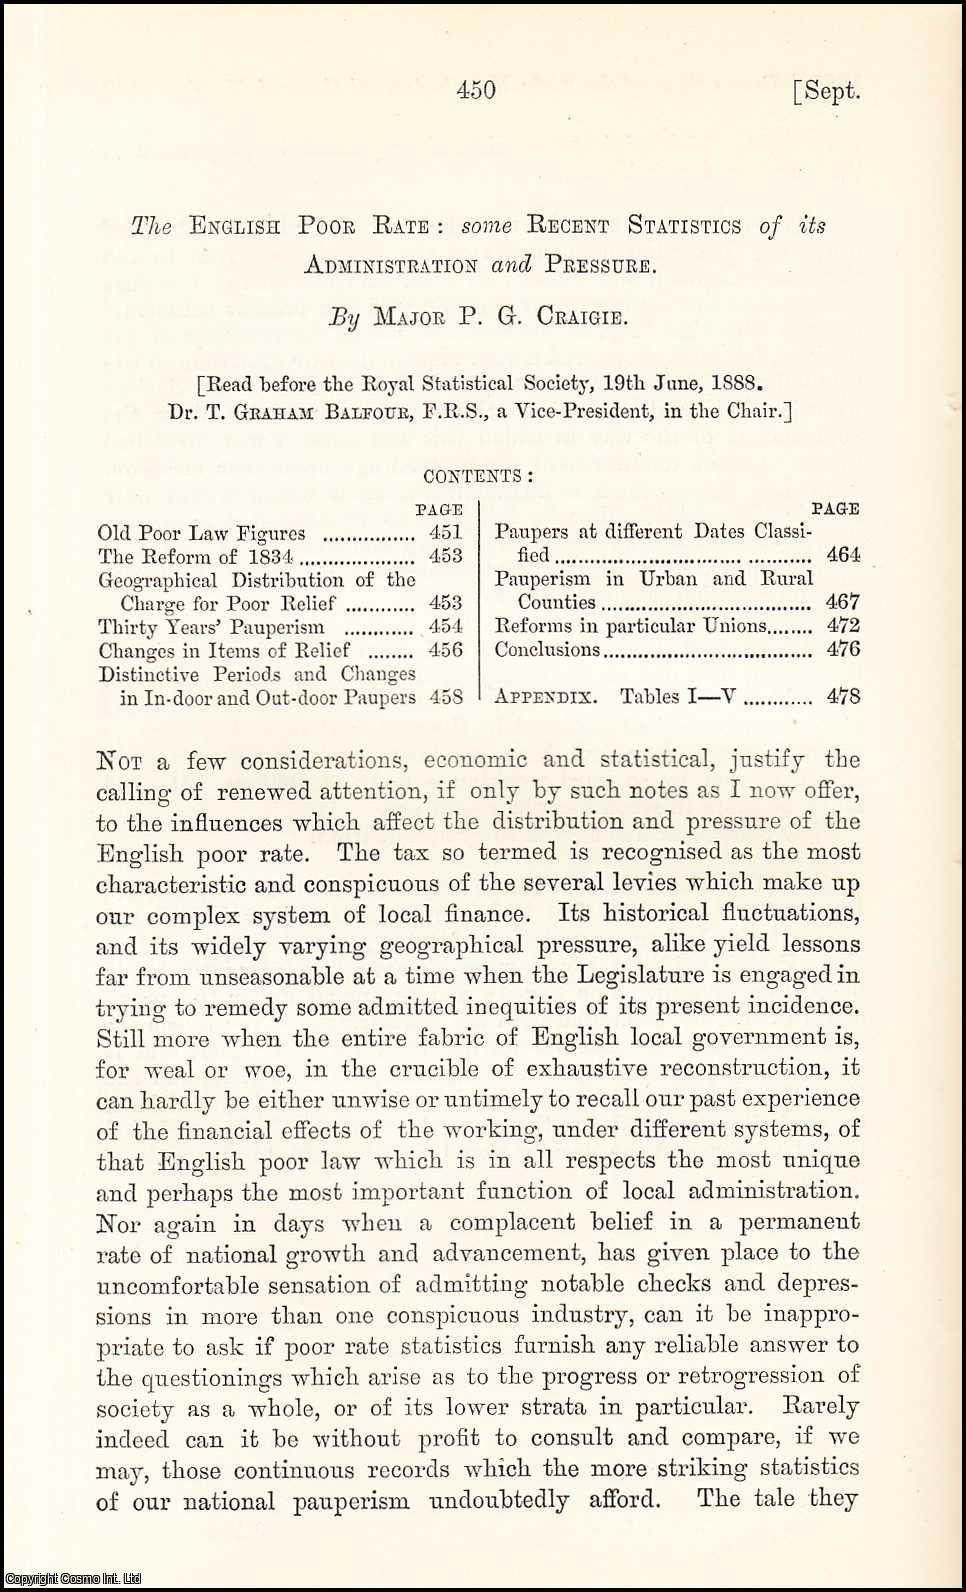 Major P.G. Craigie, F.S.S.., F.R.G.S., Secretary of the Central Chamber of Agriculture. - The English Poor Rate : some Recent Statistics of its Administration & Pressure. An uncommon original article from the Journal of the Royal Statistical Society of London, 1888.